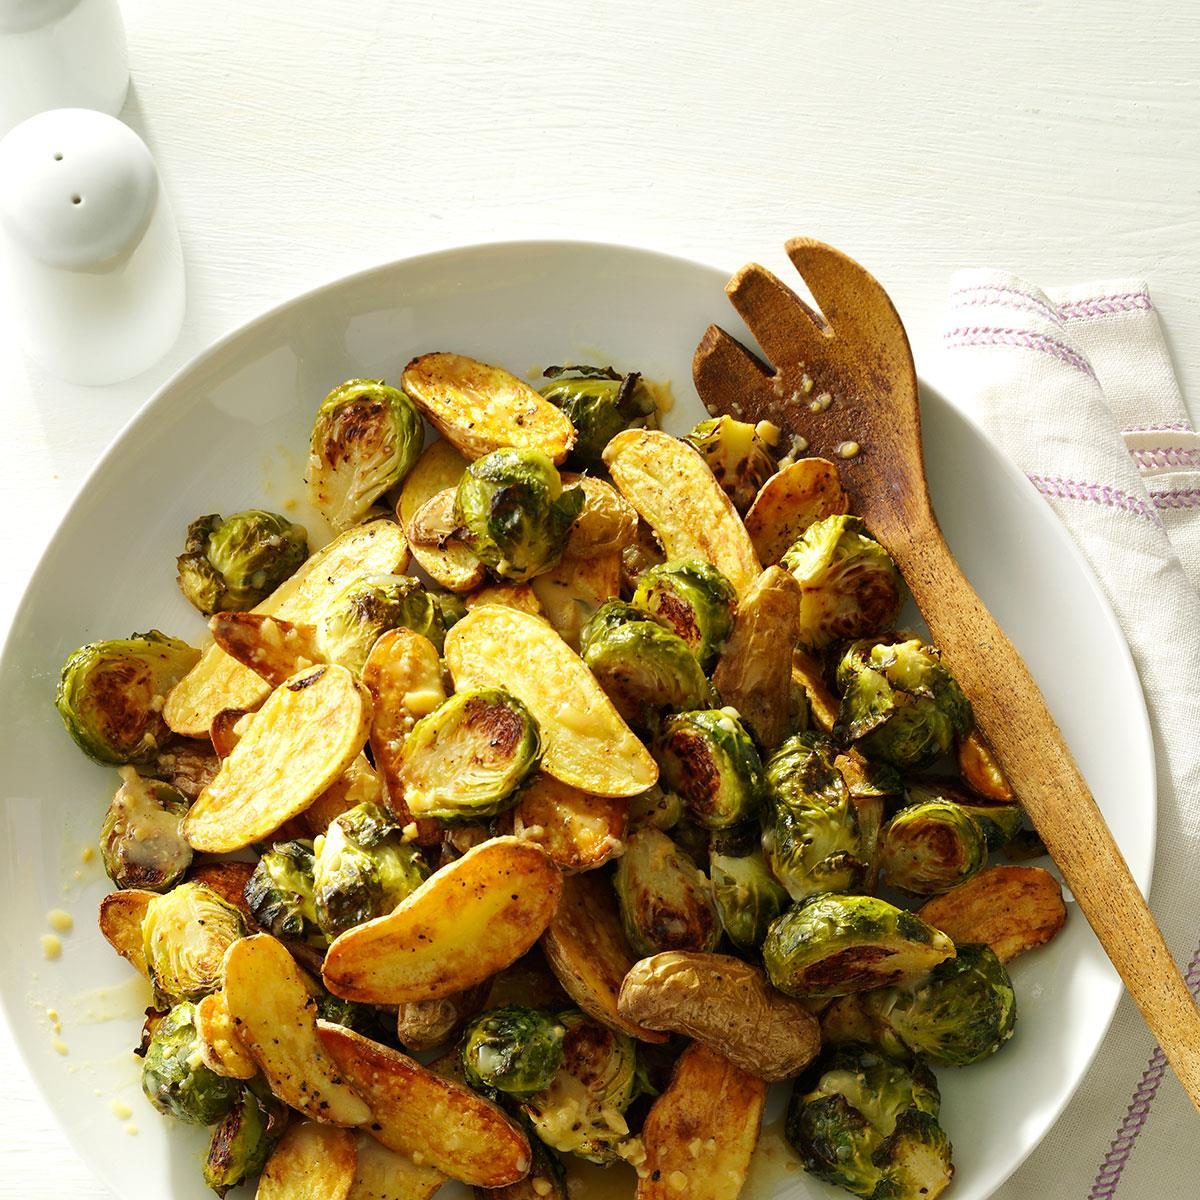 Lemon Roasted Fingerlings And Brussels Sprouts Exps172208 Sd143203d10 15 4bc Rms 11